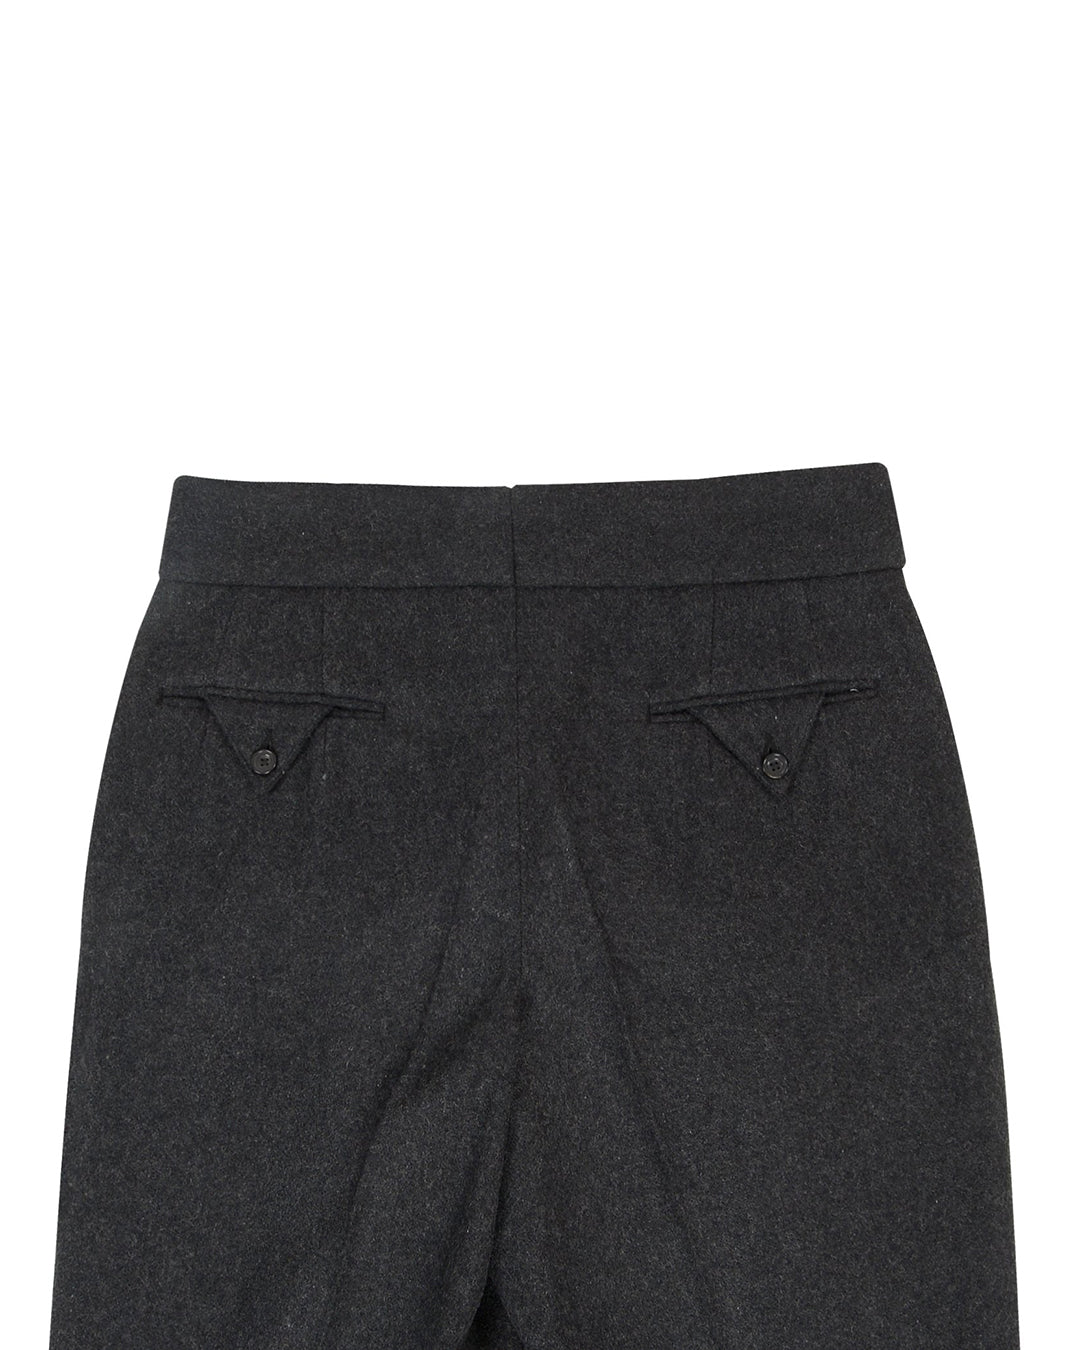 Back view of the Gurkha Pant in Charcoal Grey Wool